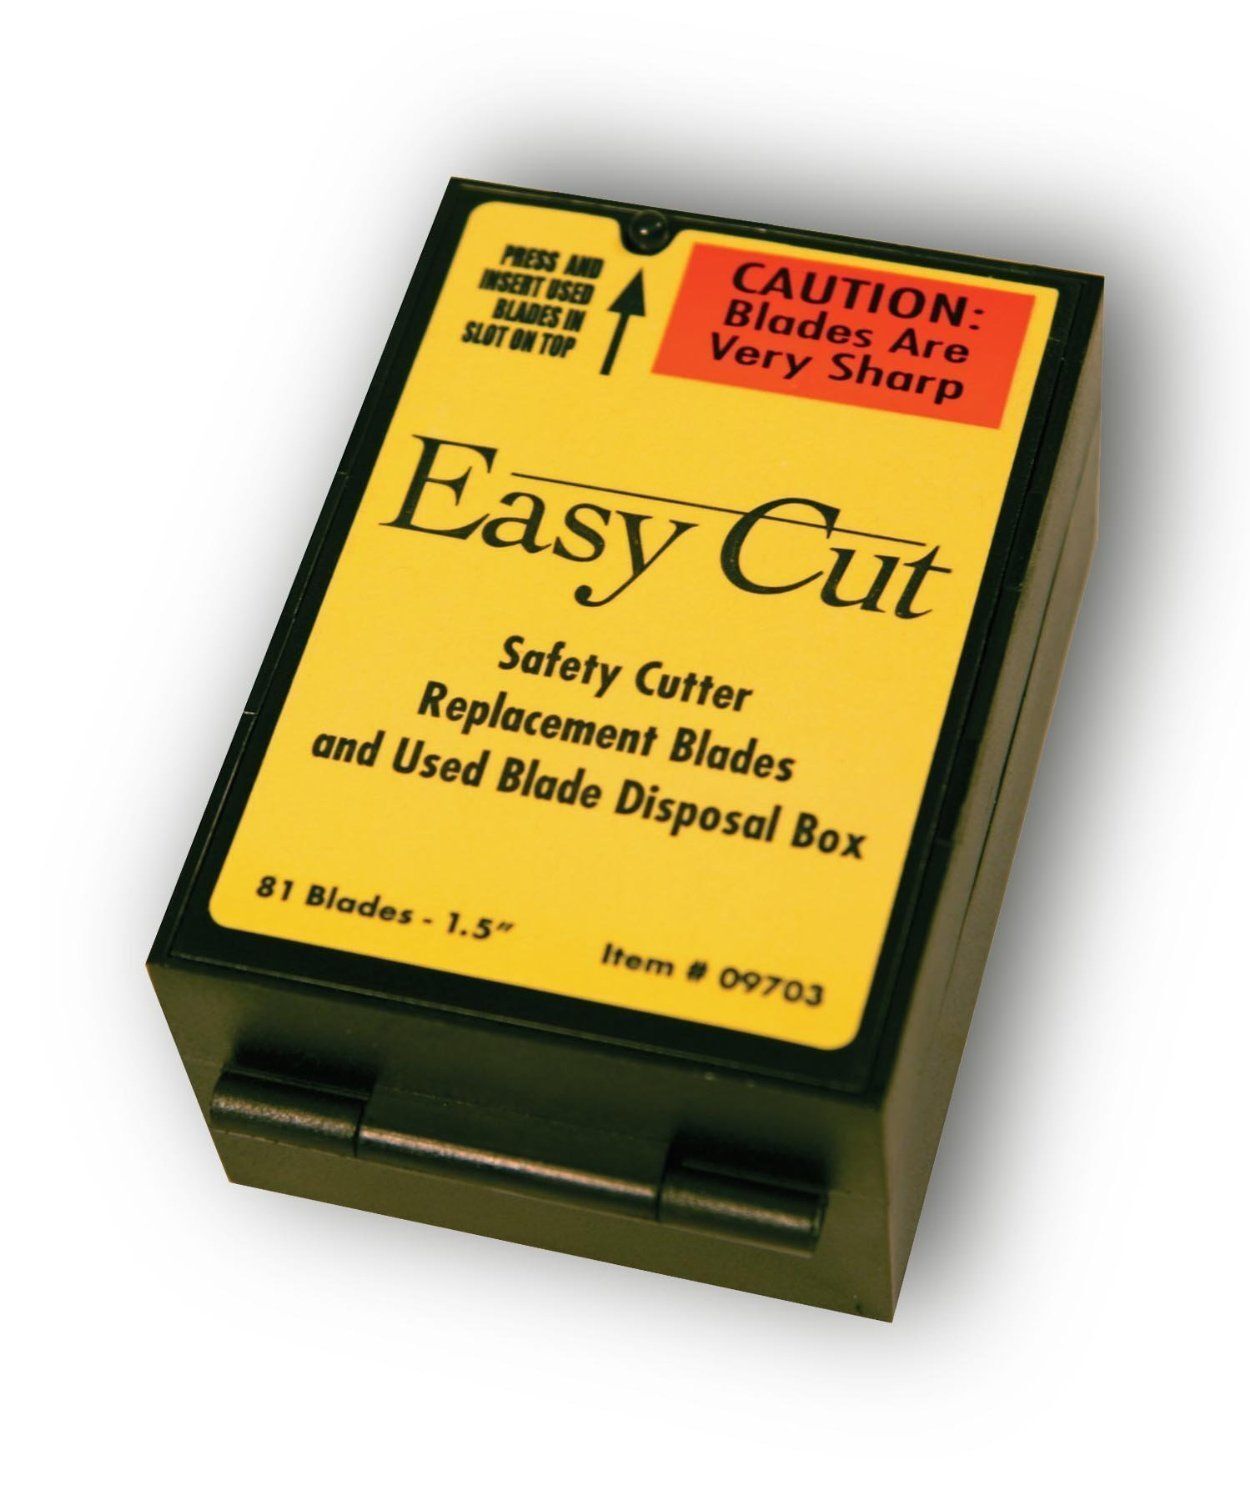 6 BOXES Easycut Safety Box Cutter Knife Replacement Blades Easy